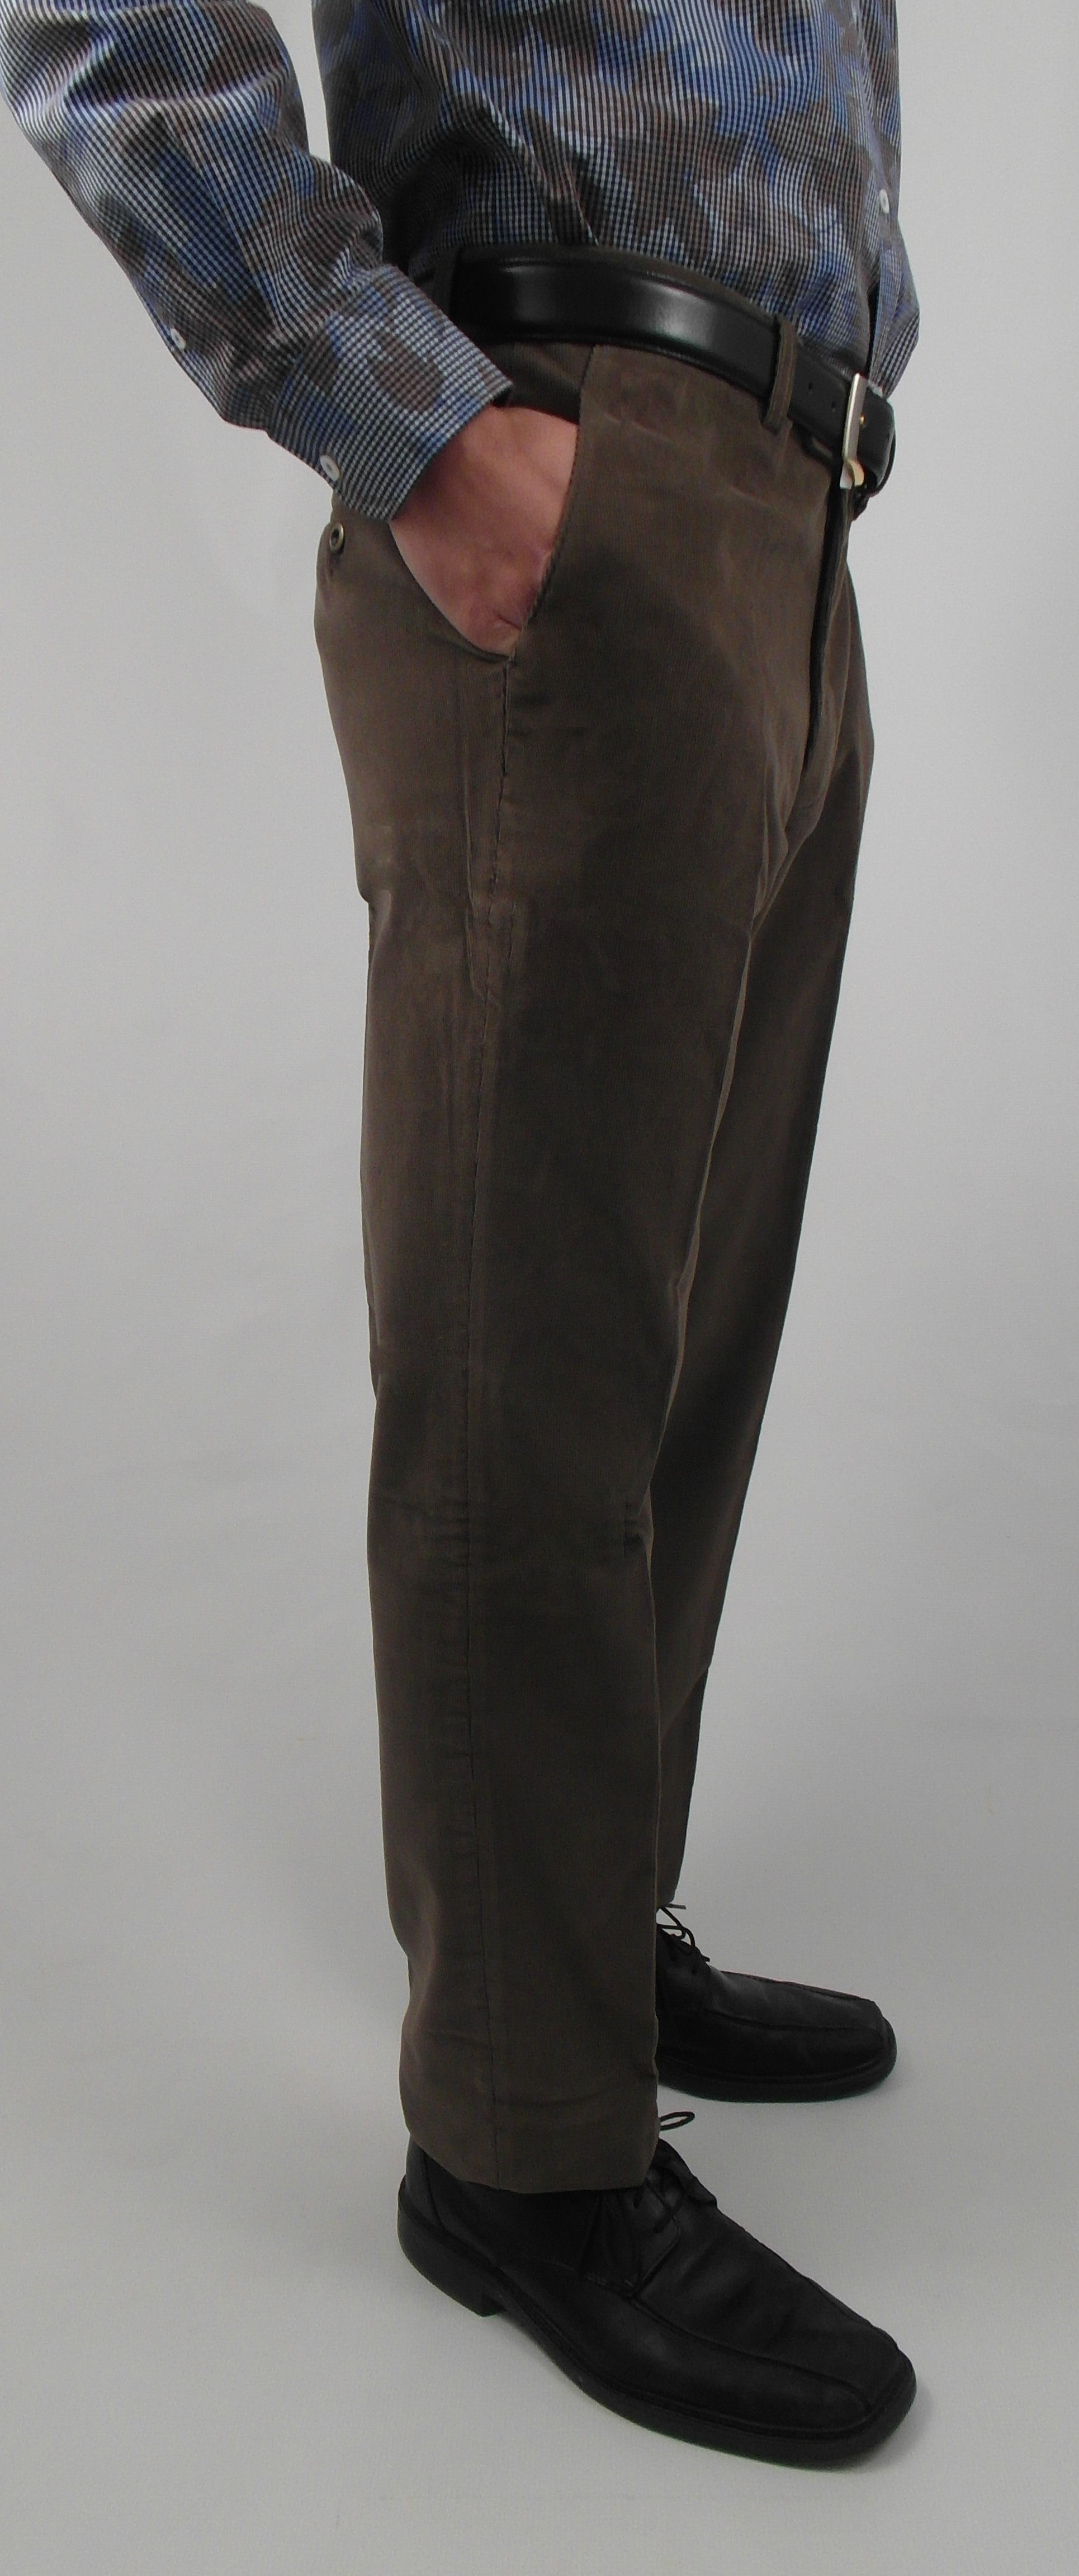 Gala - W13 - Stretch Corduroy Pant - Polyester Fine Wale - Available i 